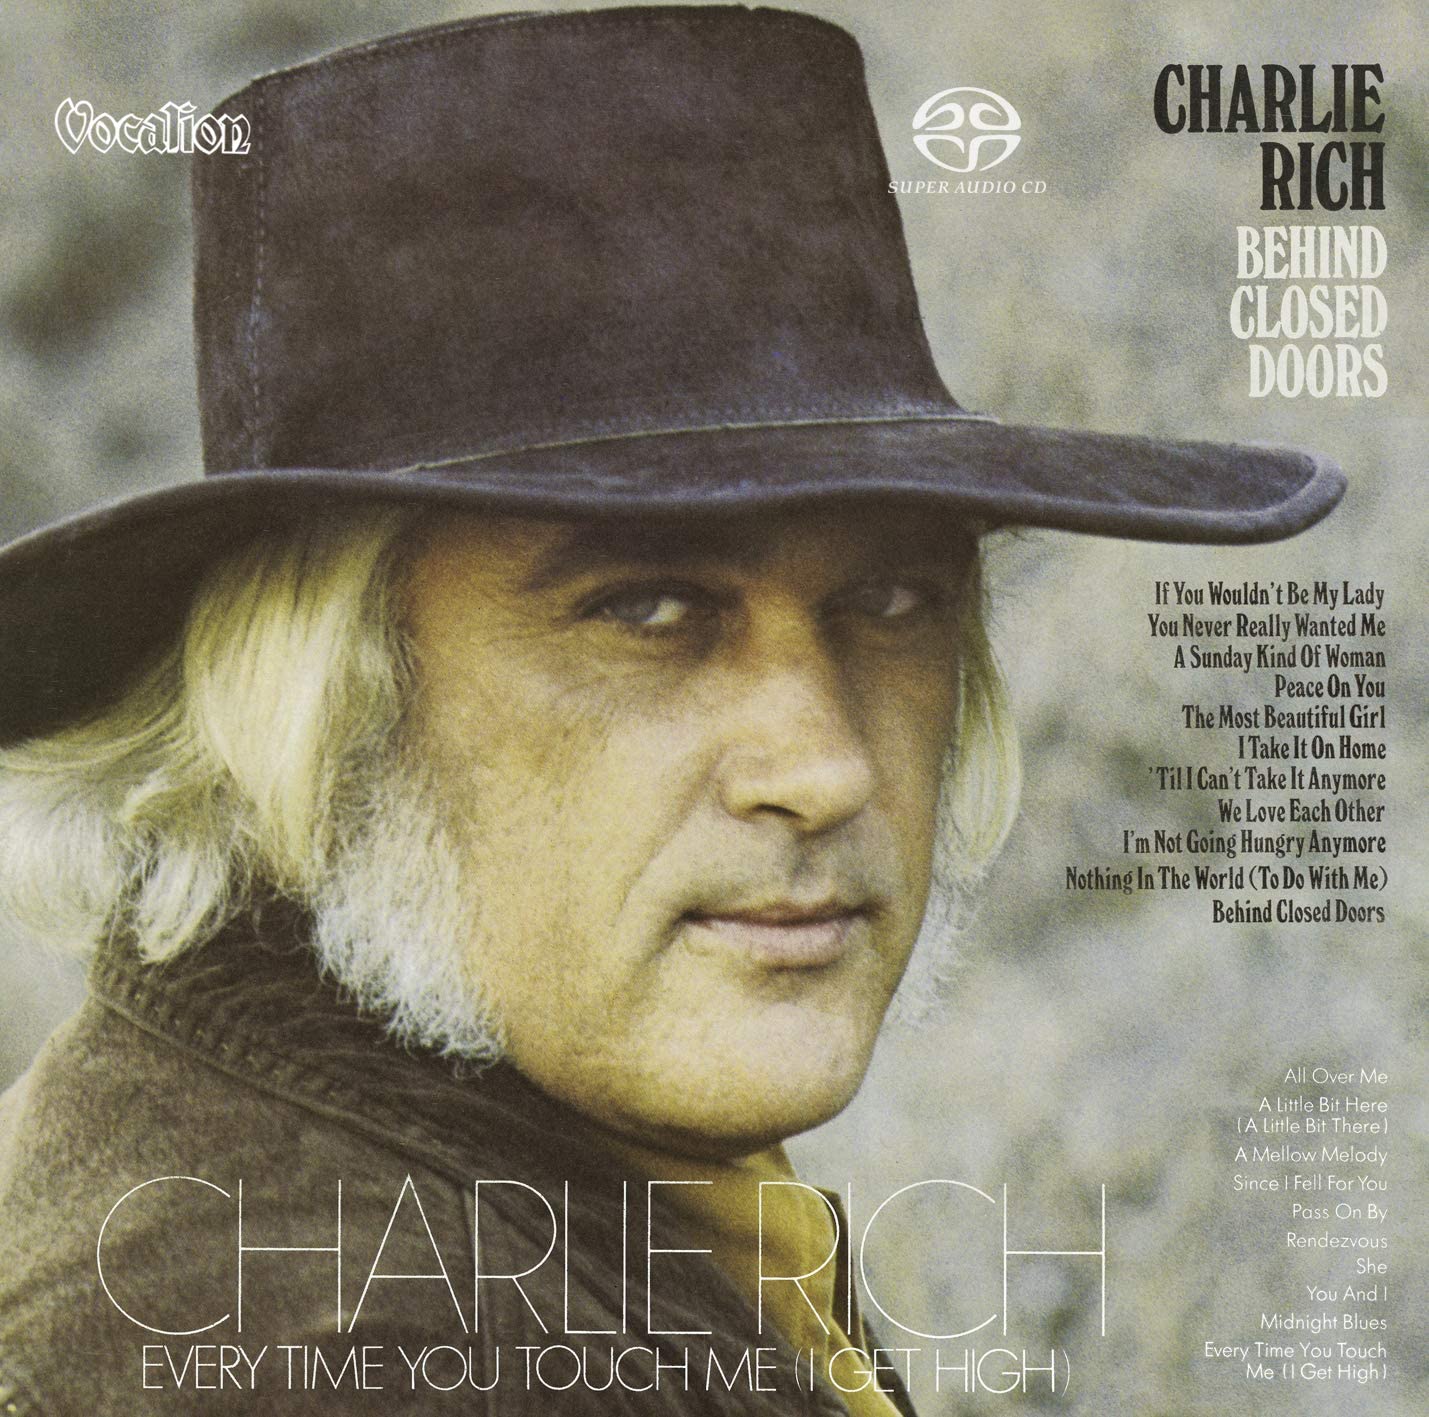 Charlie Rich – Behind Closed Doors & Every Time You Touch Me (1973 & 1975) [Reissue 2019] MCH SACD ISO + Hi-Res FLAC